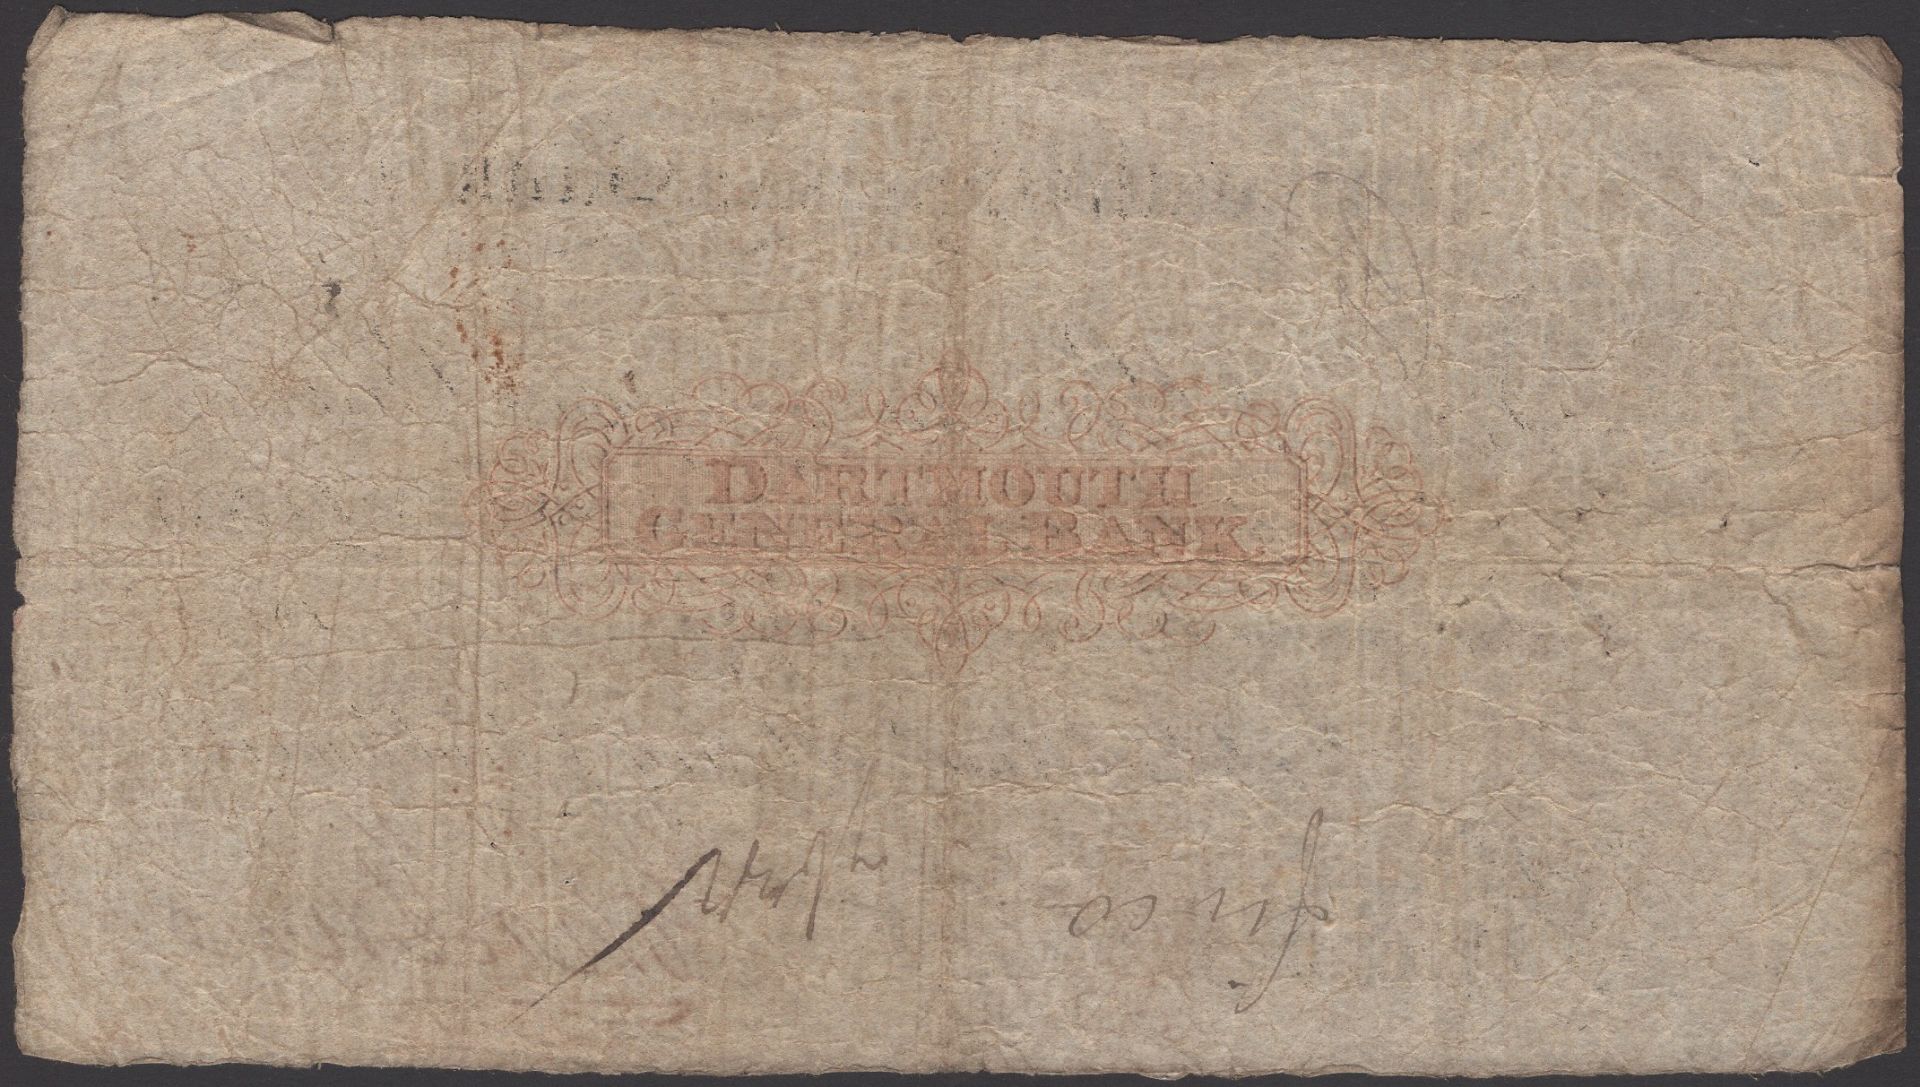 Dartmouth General Bank, for John Hine and Henry J. Holdsworth, Â£5, 26 January 1819, serial n... - Image 2 of 2